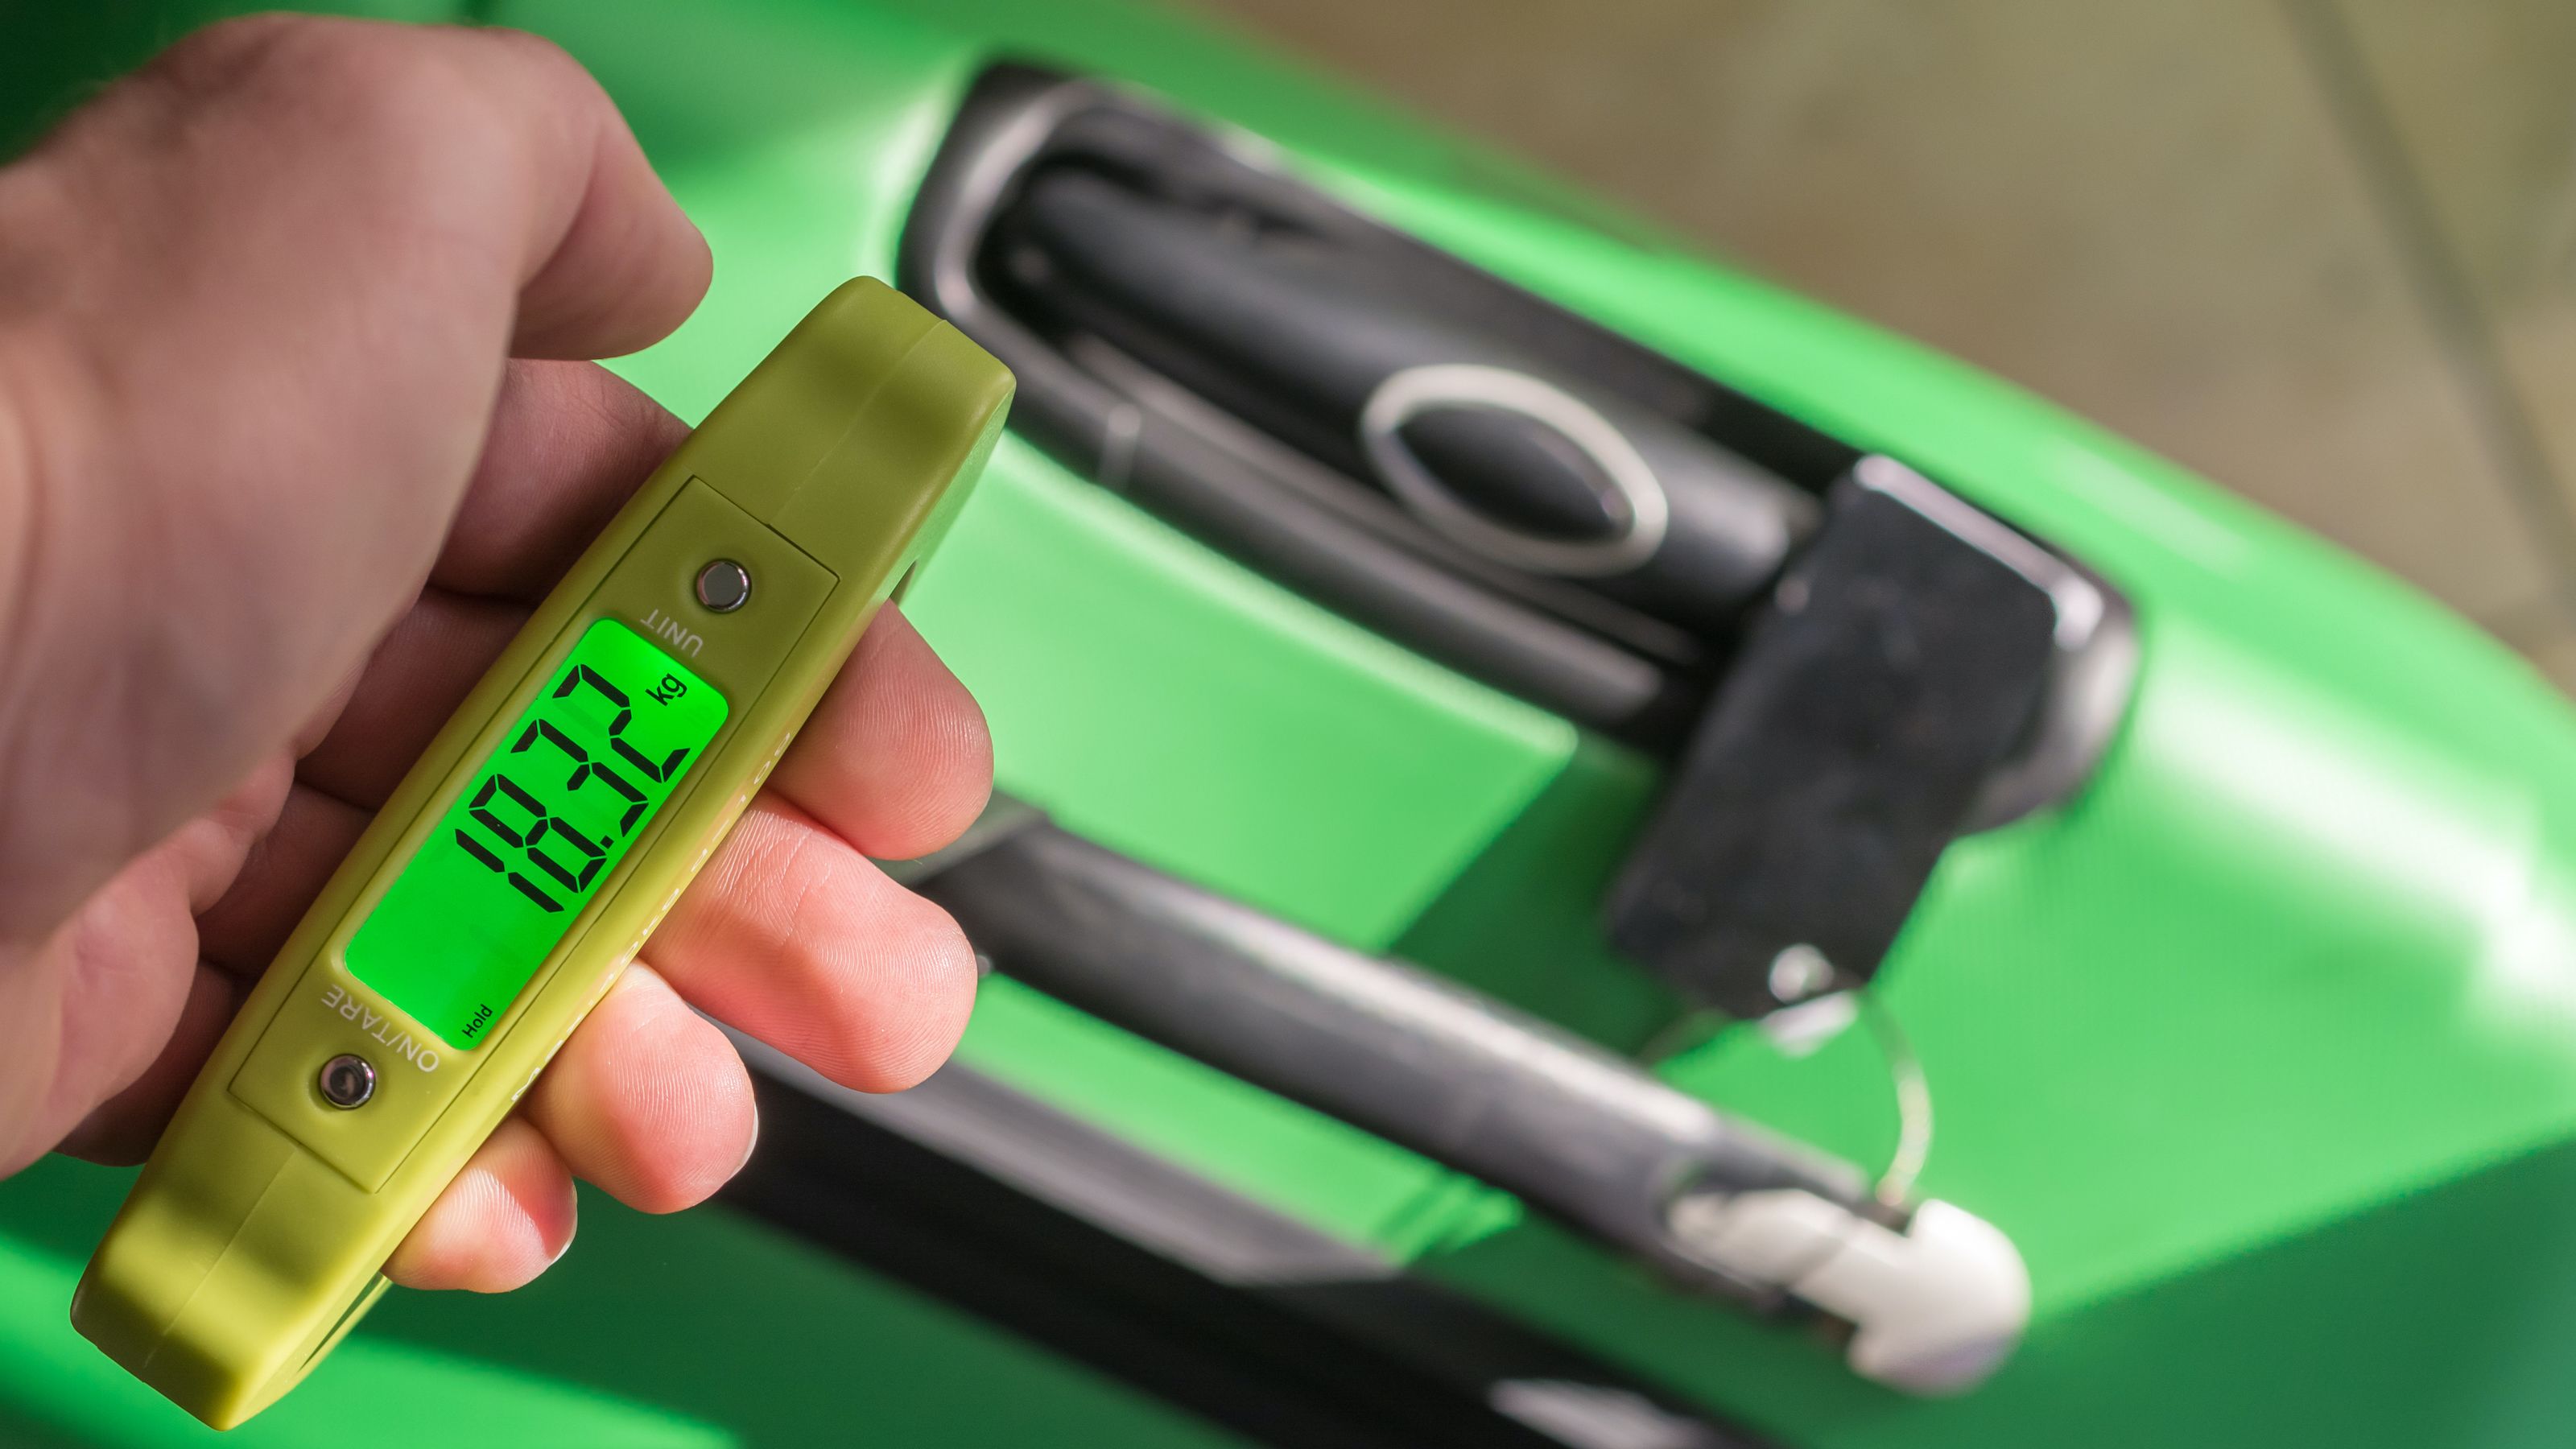 Every traveler should carry a luggage scale — here are 11 of our favorites | CNN Underscored